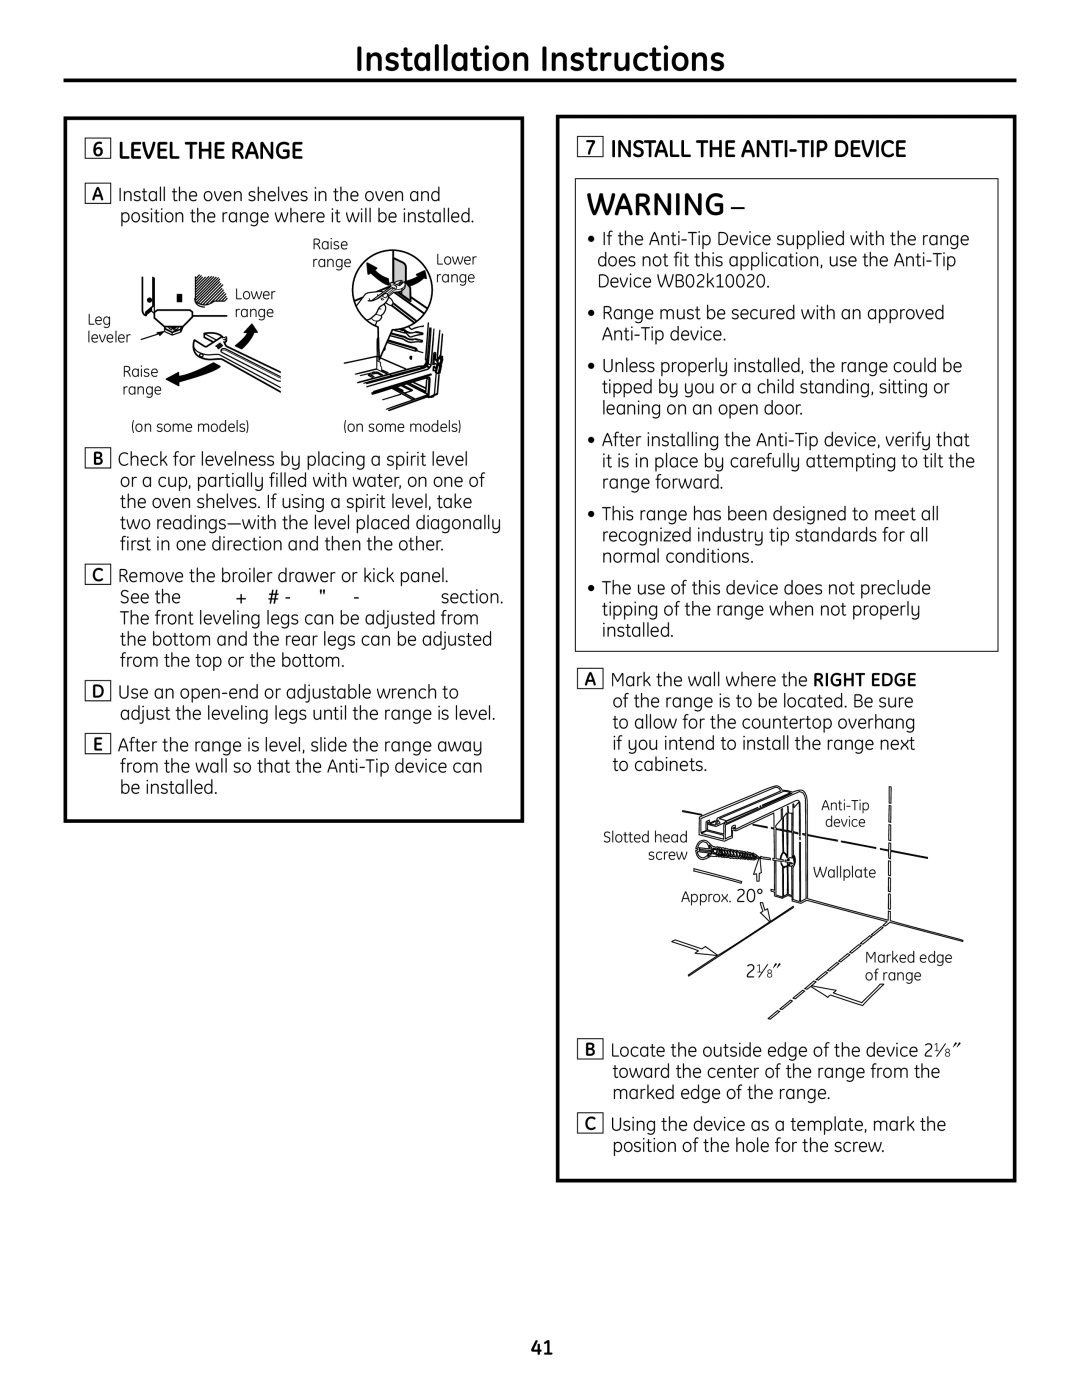 GE JGBS23DEMCC installation instructions Level the Range, Install the ANTI-TIP Device 